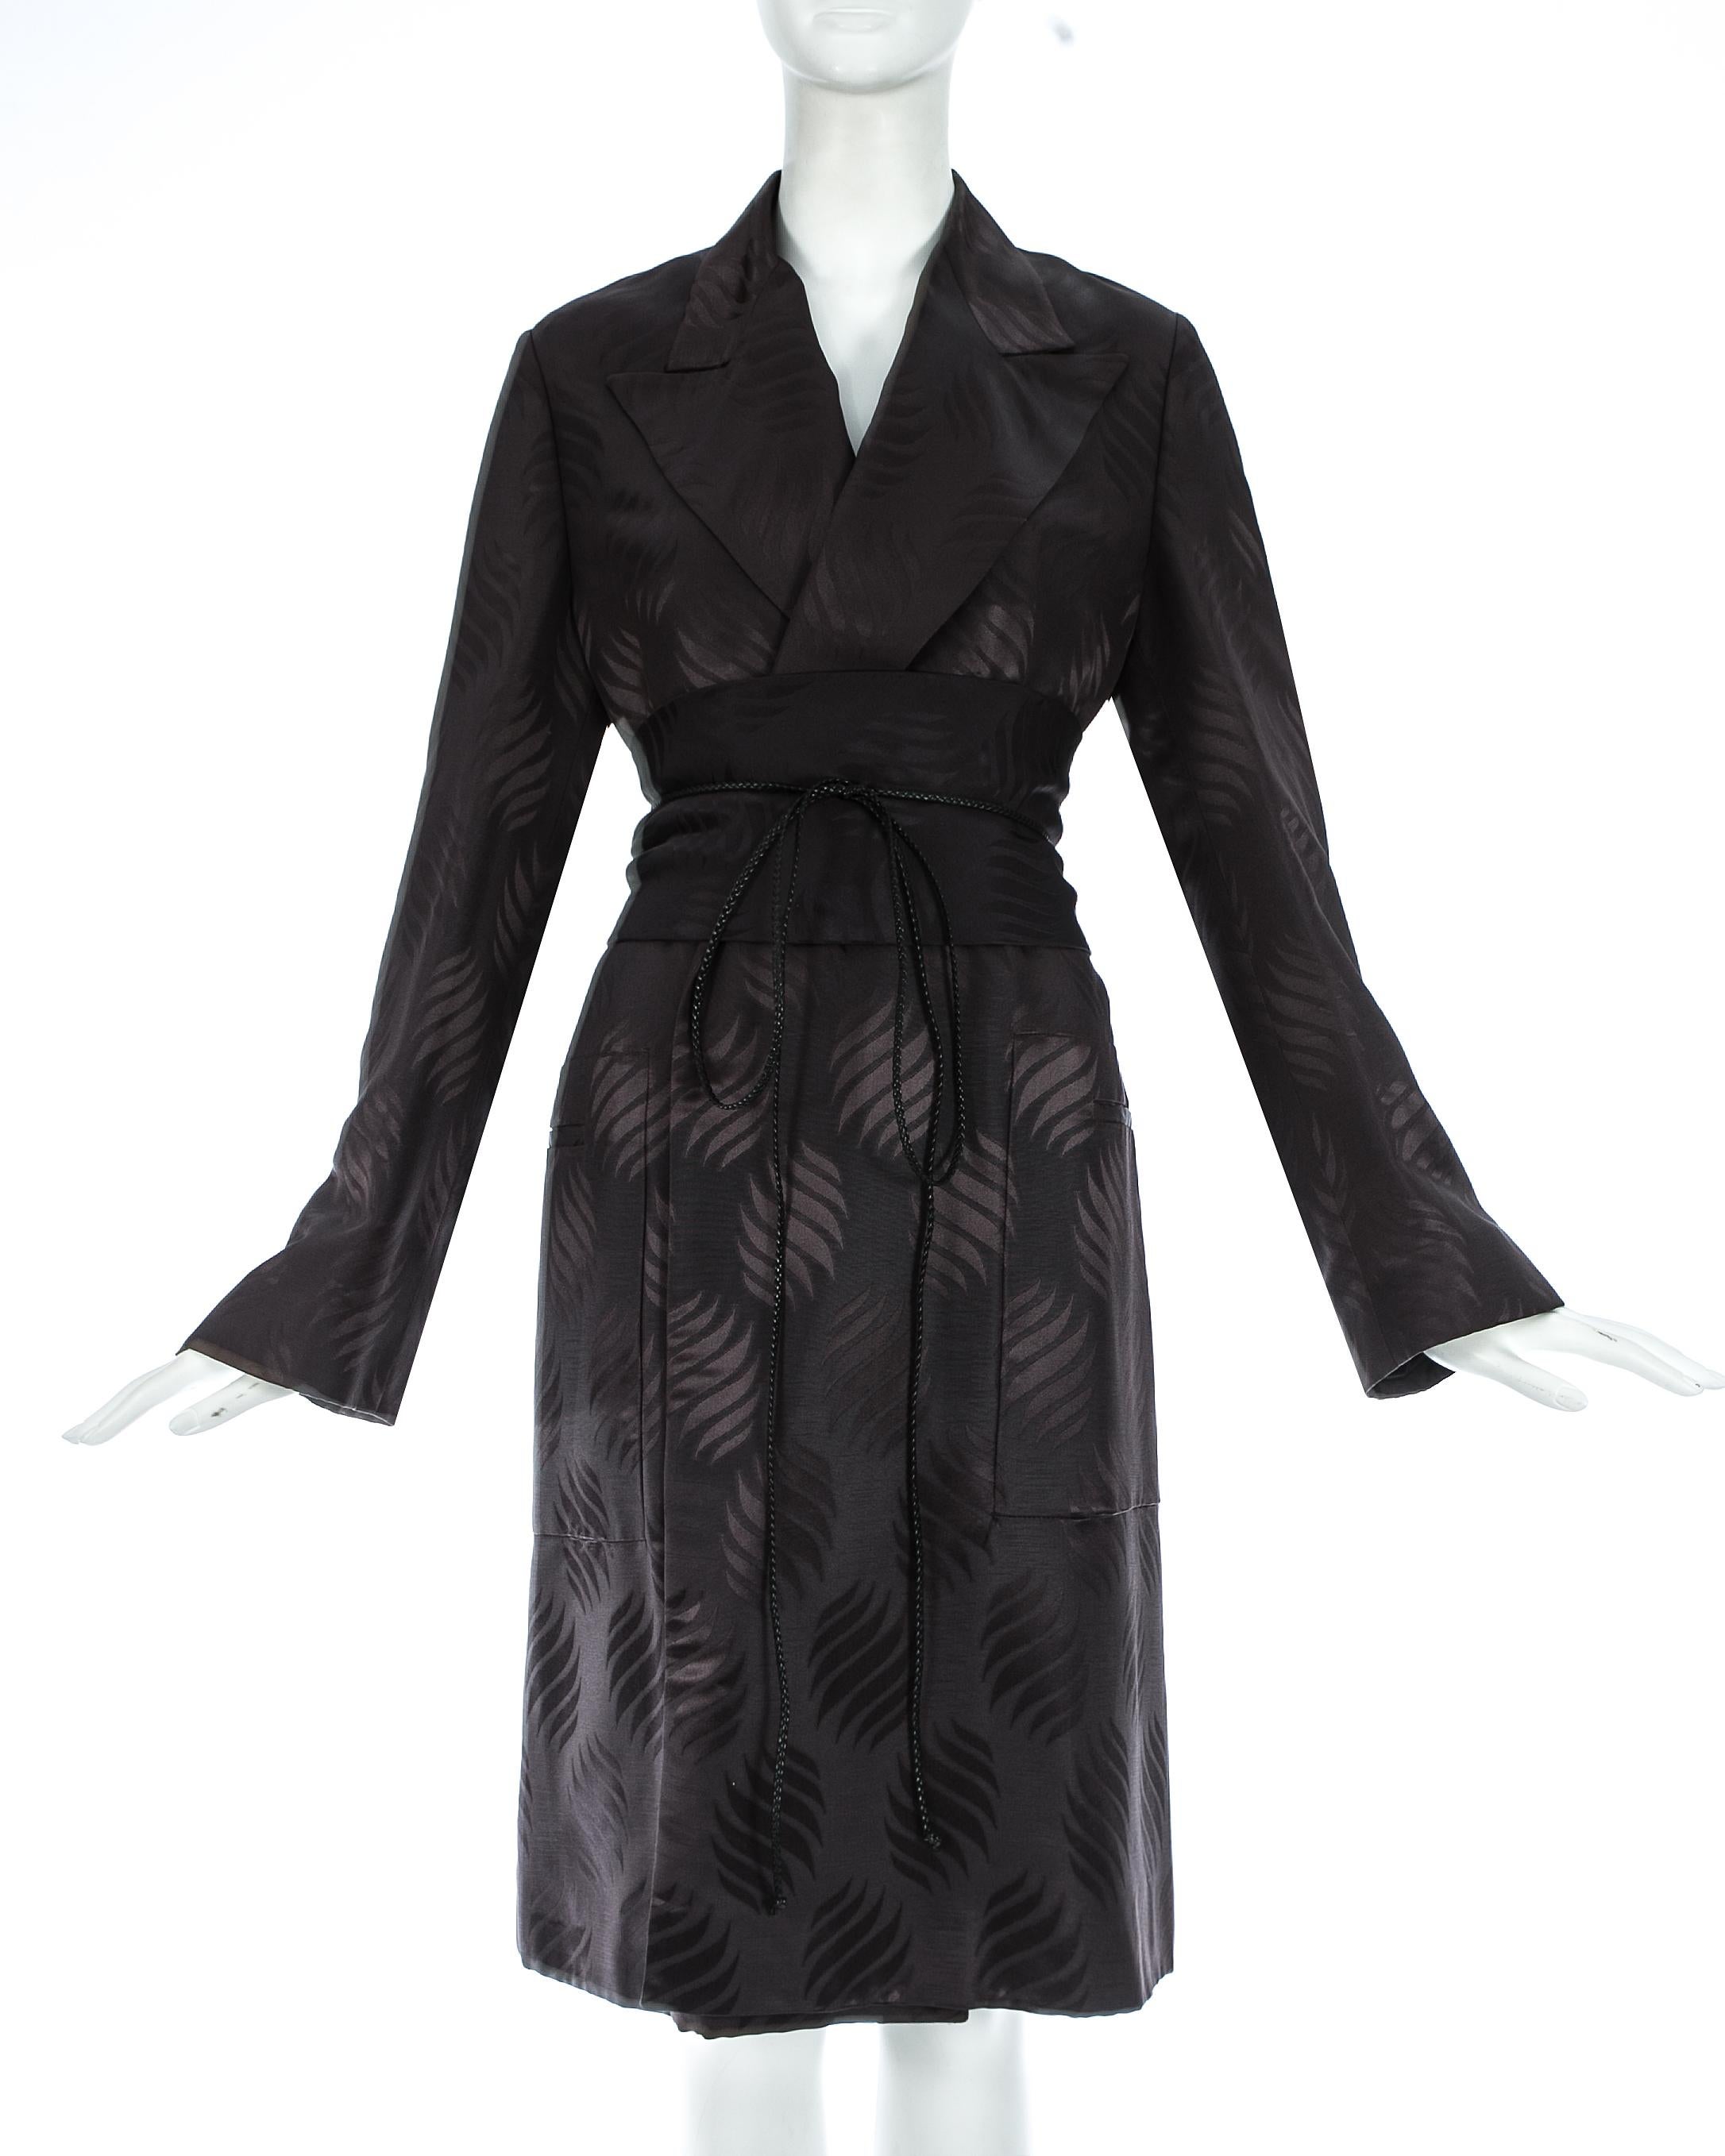 Loose fit evening robe in black silk brocade with matching Obi belt with braided leather string fastening

Autumn-Winter 2002